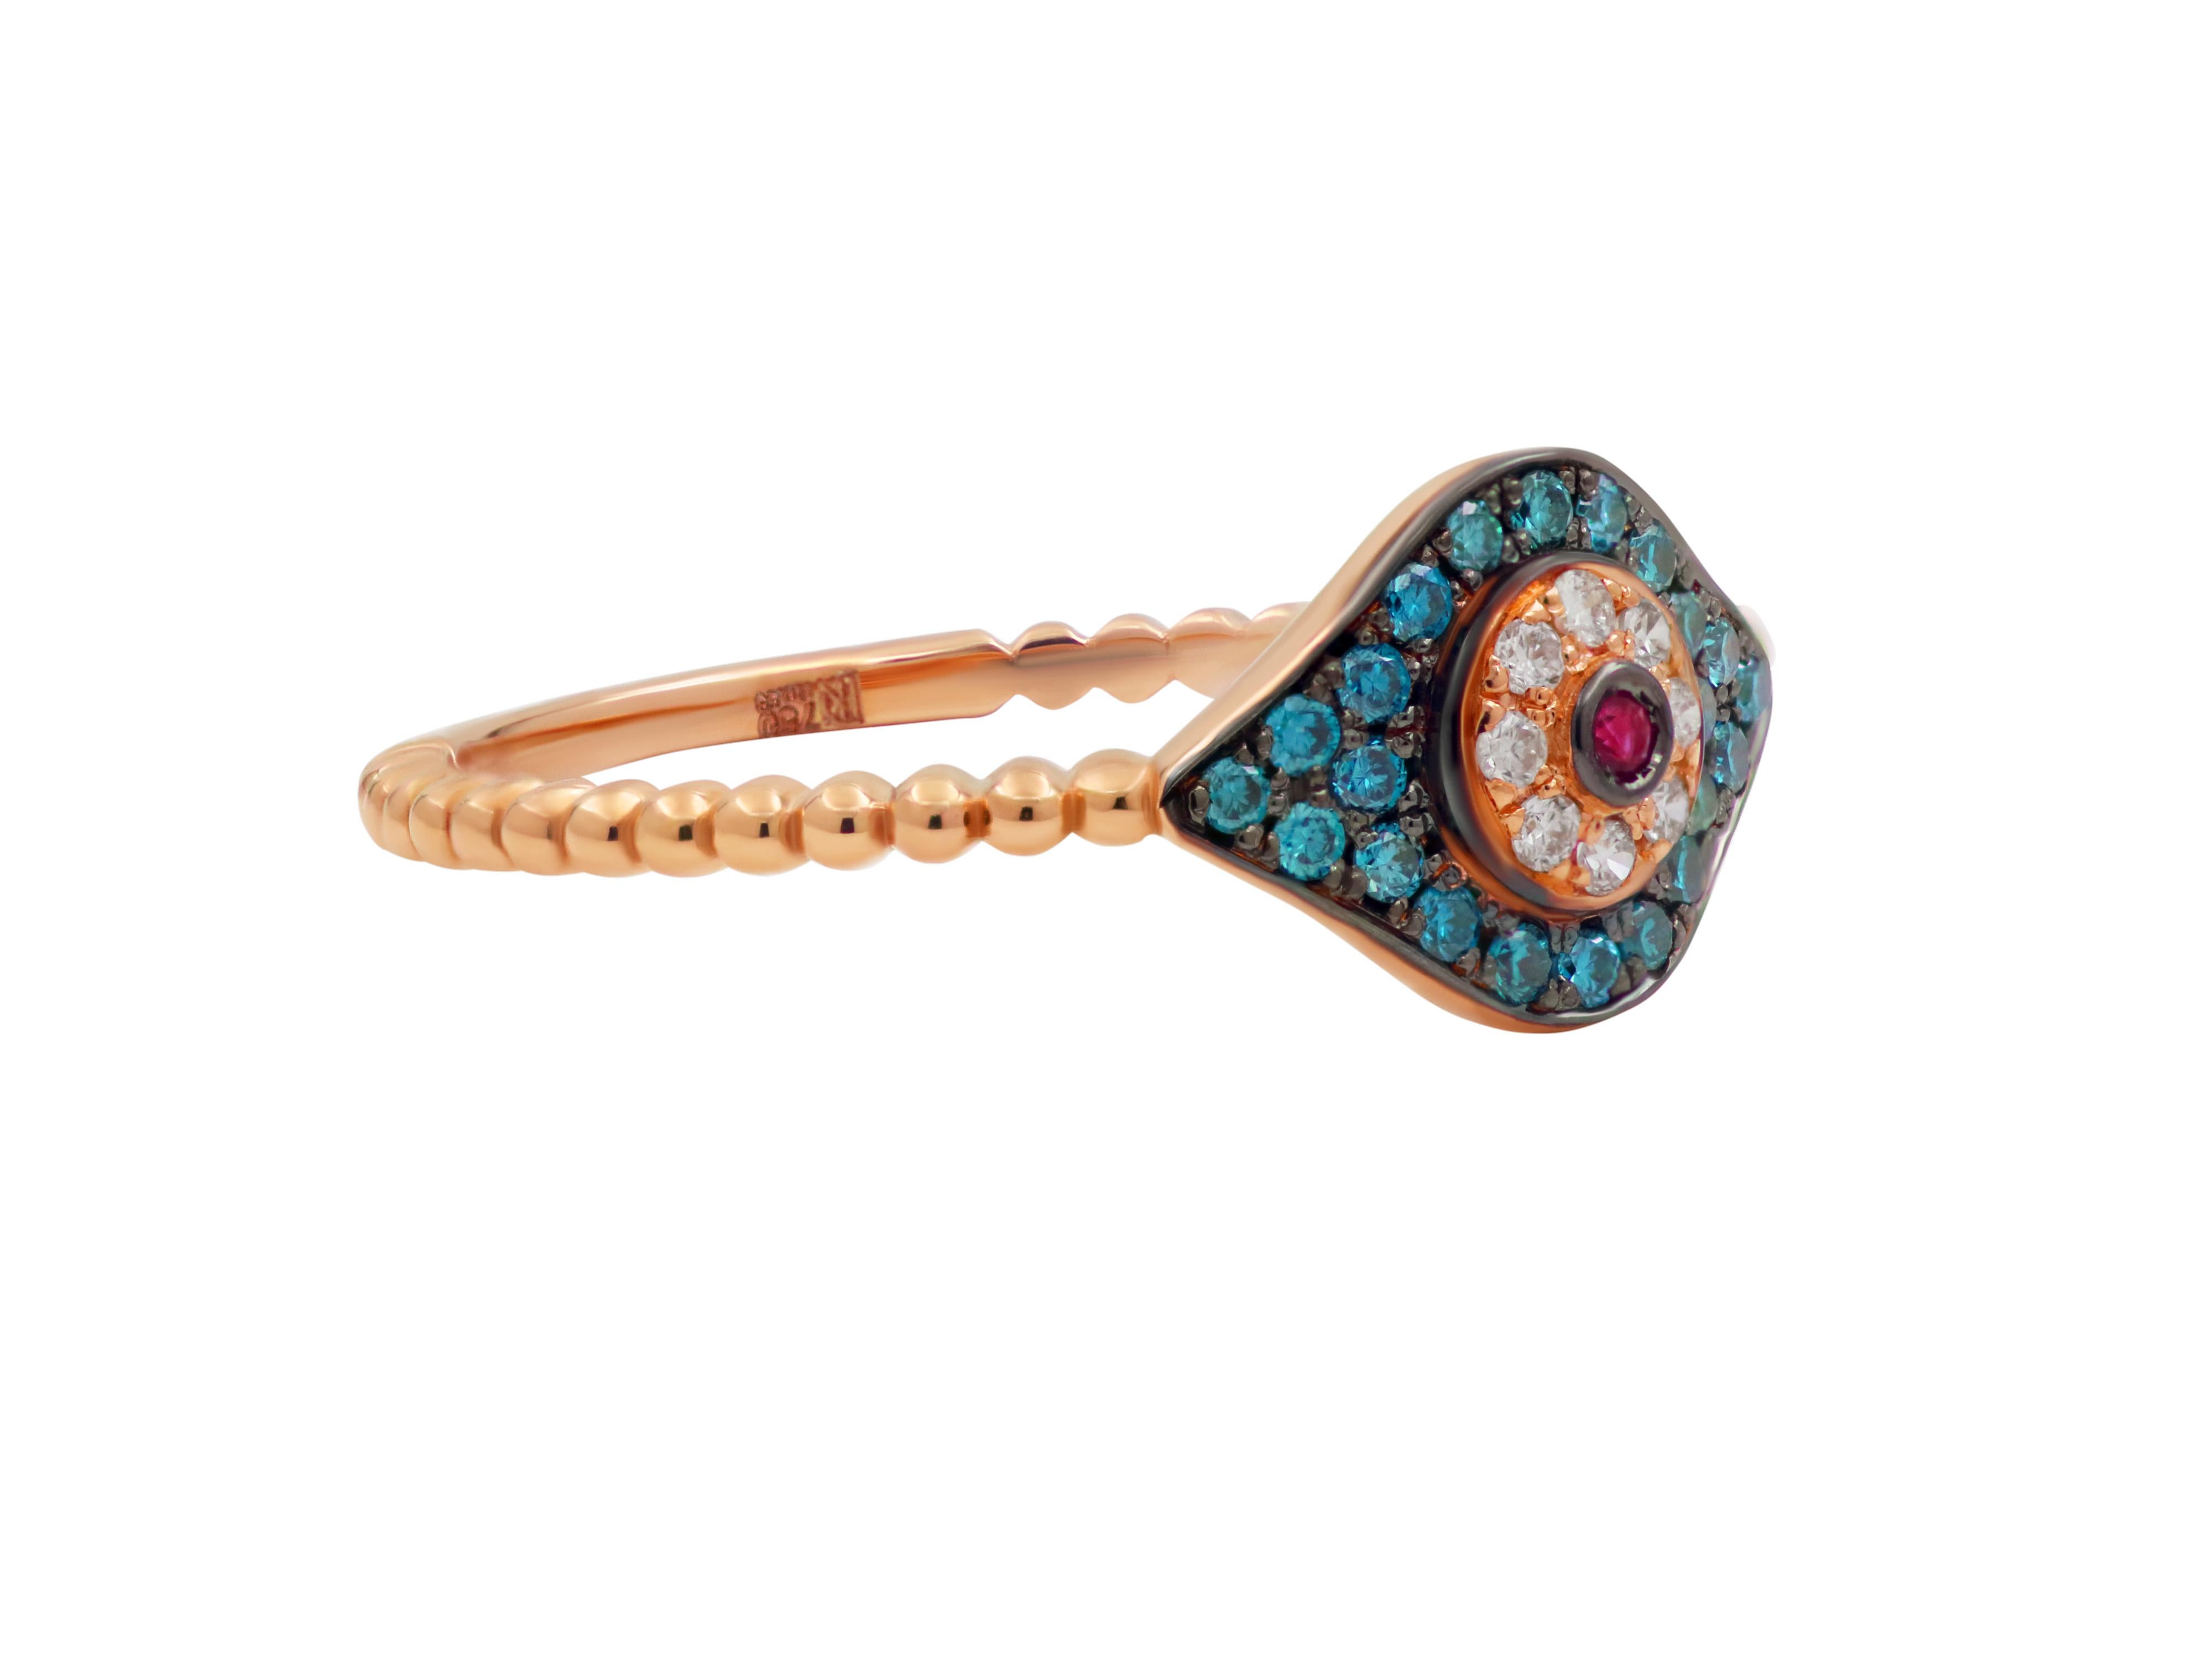 Dainty evil eye ring with in a small size set in 18k rose gold with 0.013 carats ruby, 0.12 carats blue diamonds and 0.042 carats brilliant cut white diamonds. 

Ring face: 0.314X0.393